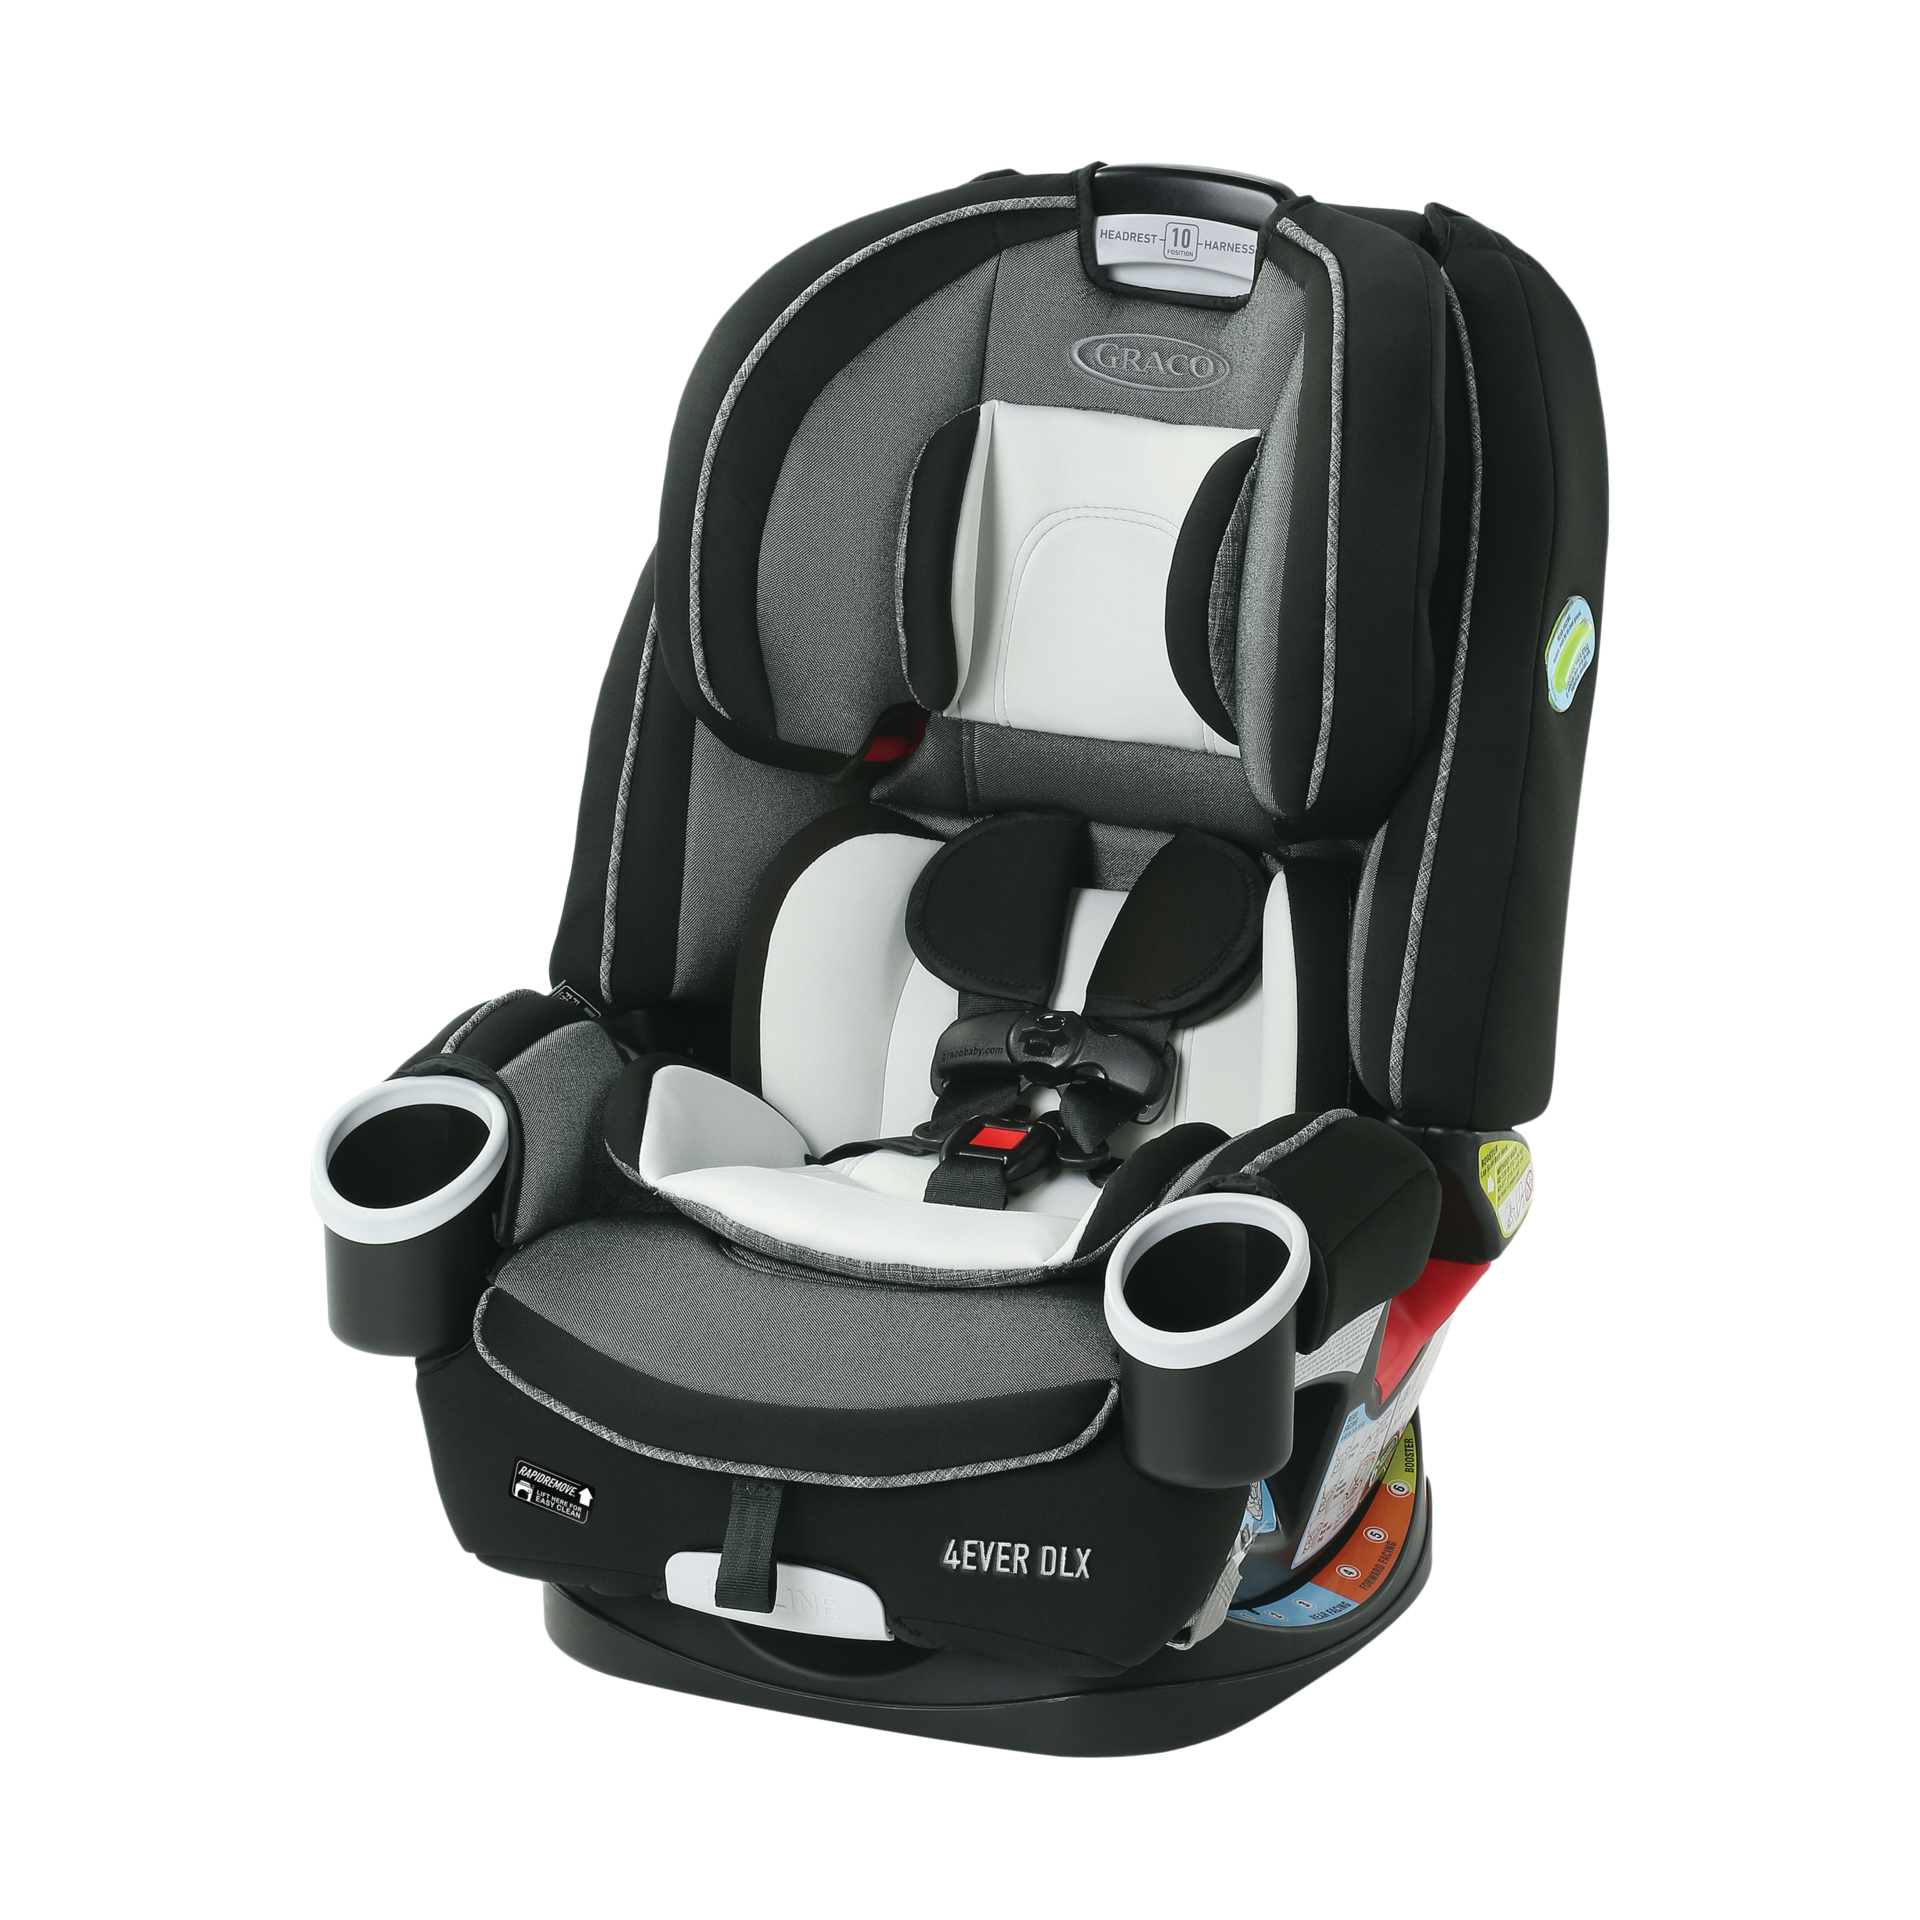 graco 4 in 1 car seat rear facing weight limit